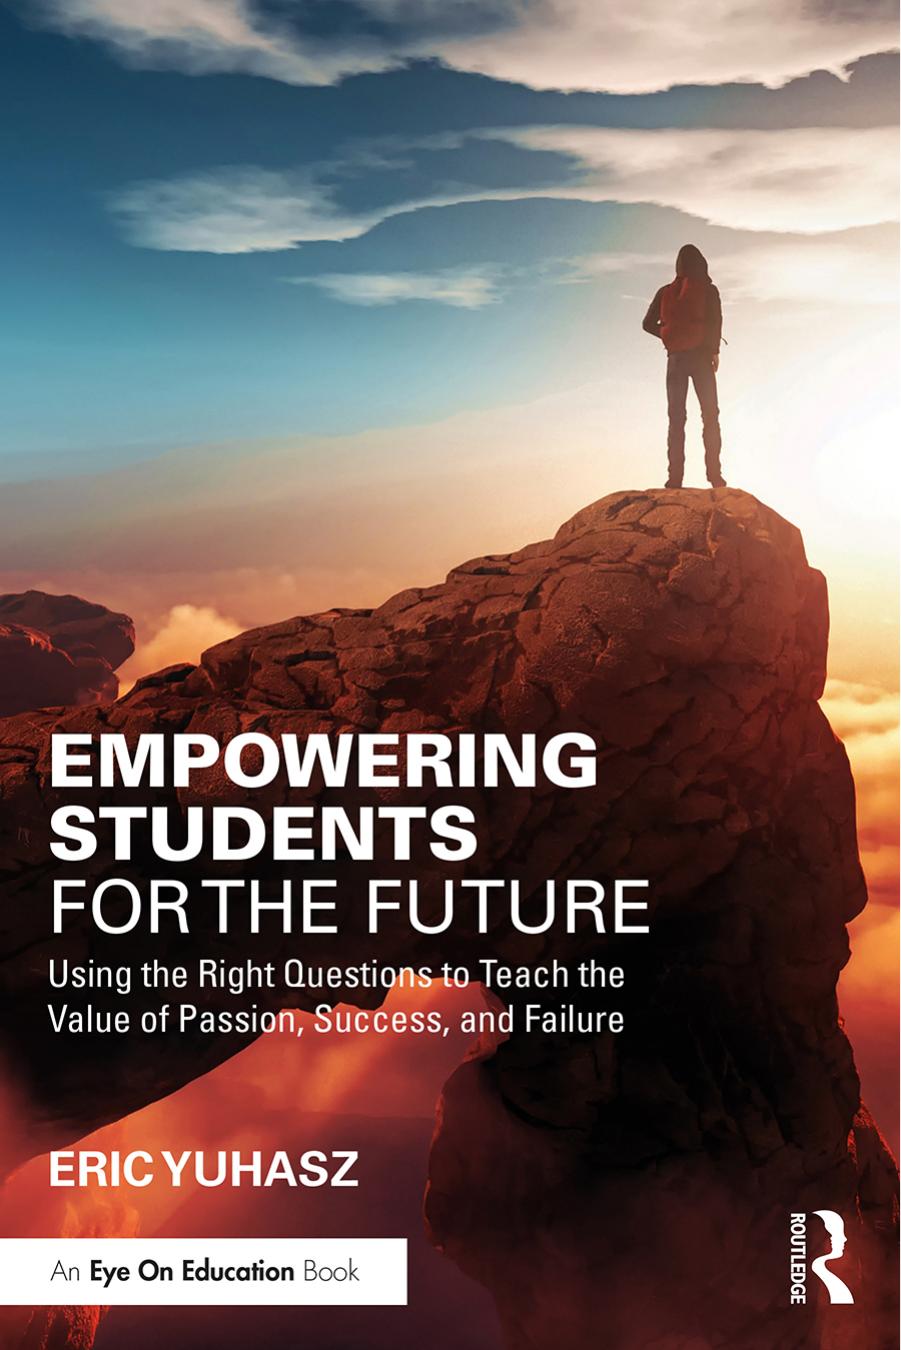 Empowering Students for the Future: Using the Right Questions to Teach the Value of Passion, Success, and Failure by Eric Yuhasz